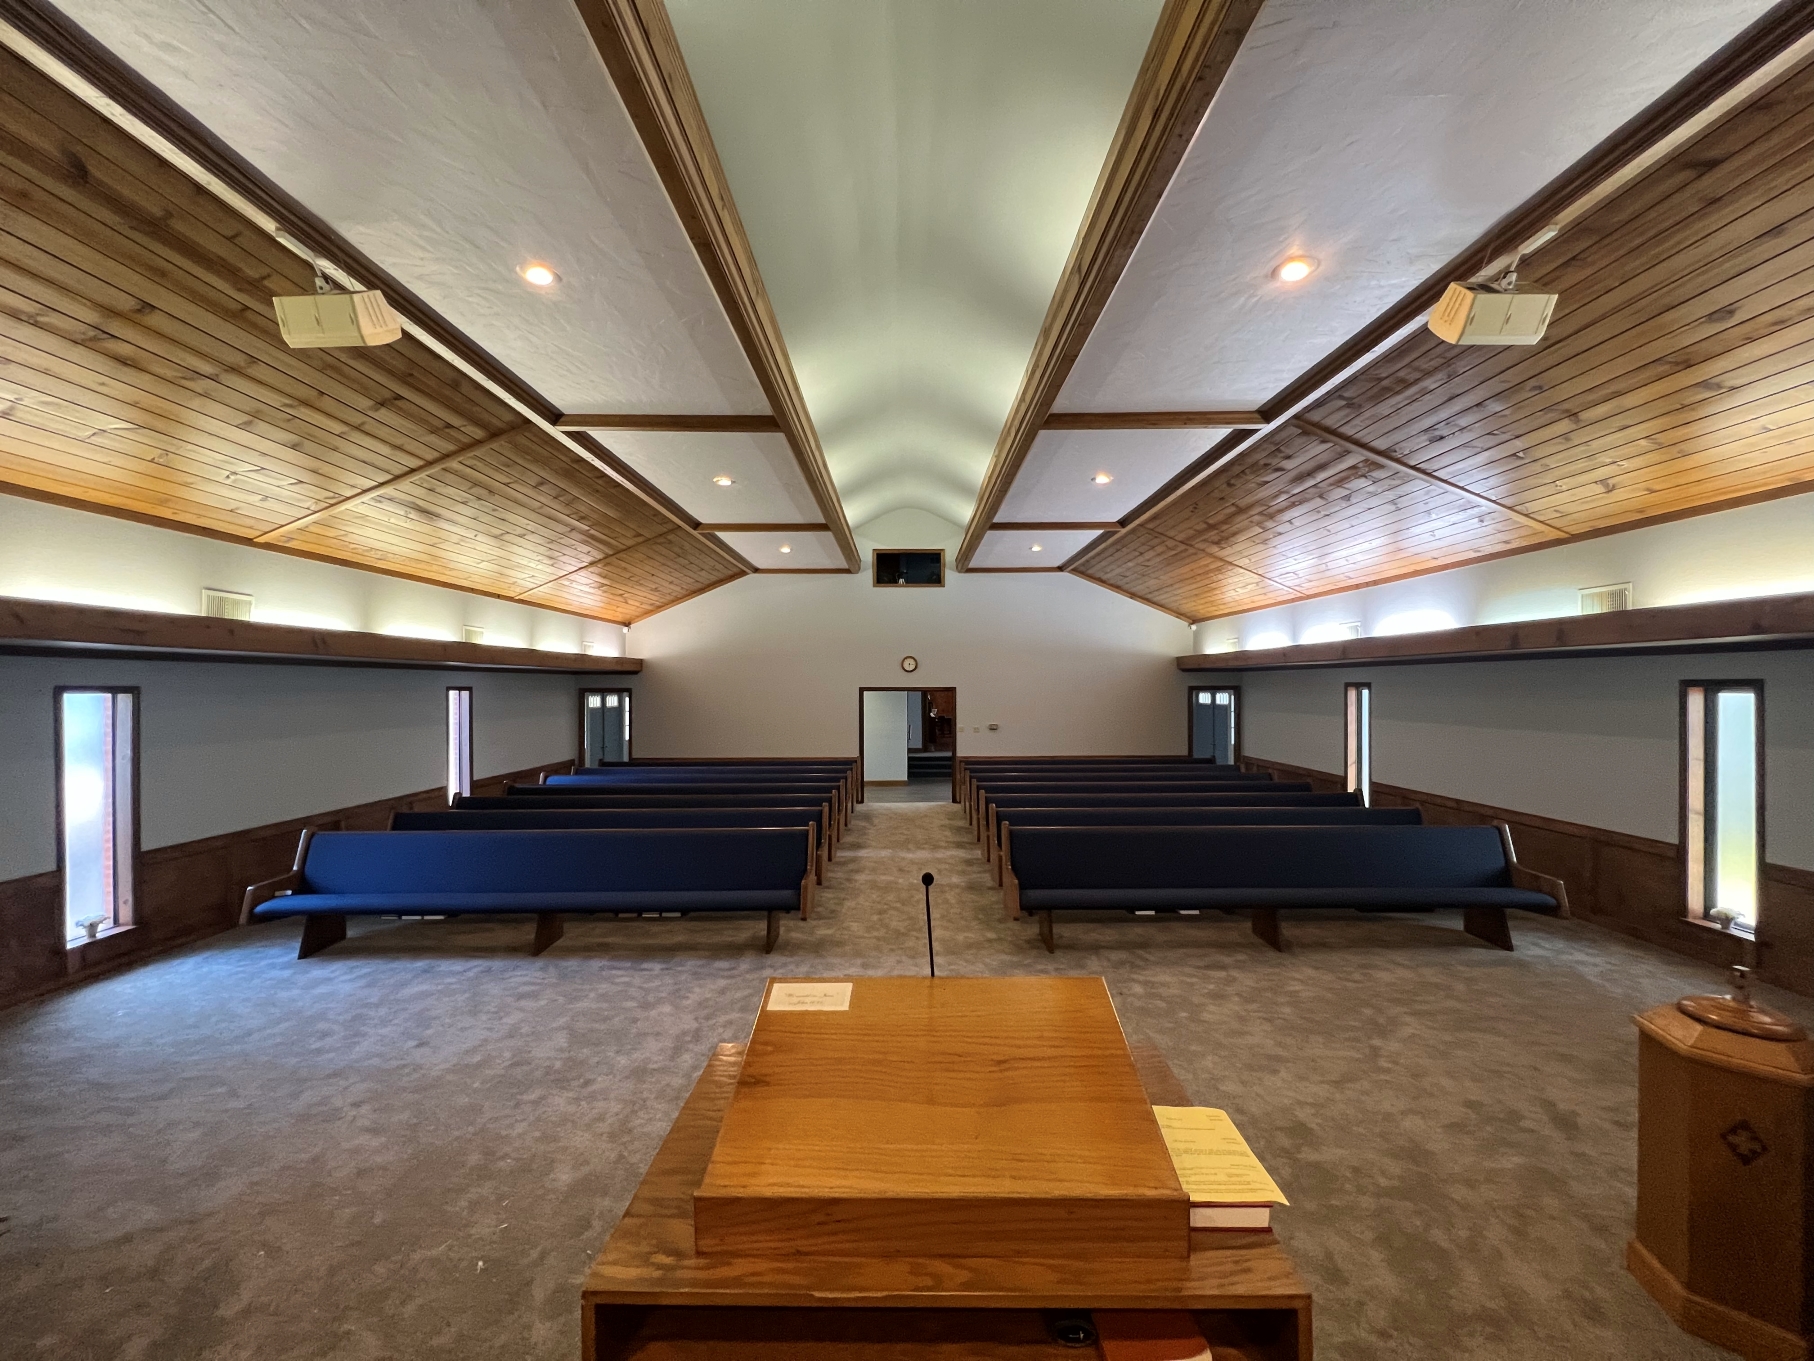 Pic2New Kivetts Pews installed in Monticello, Arkansas from Woods Church Interiors - Americas Largest Pew Dealer